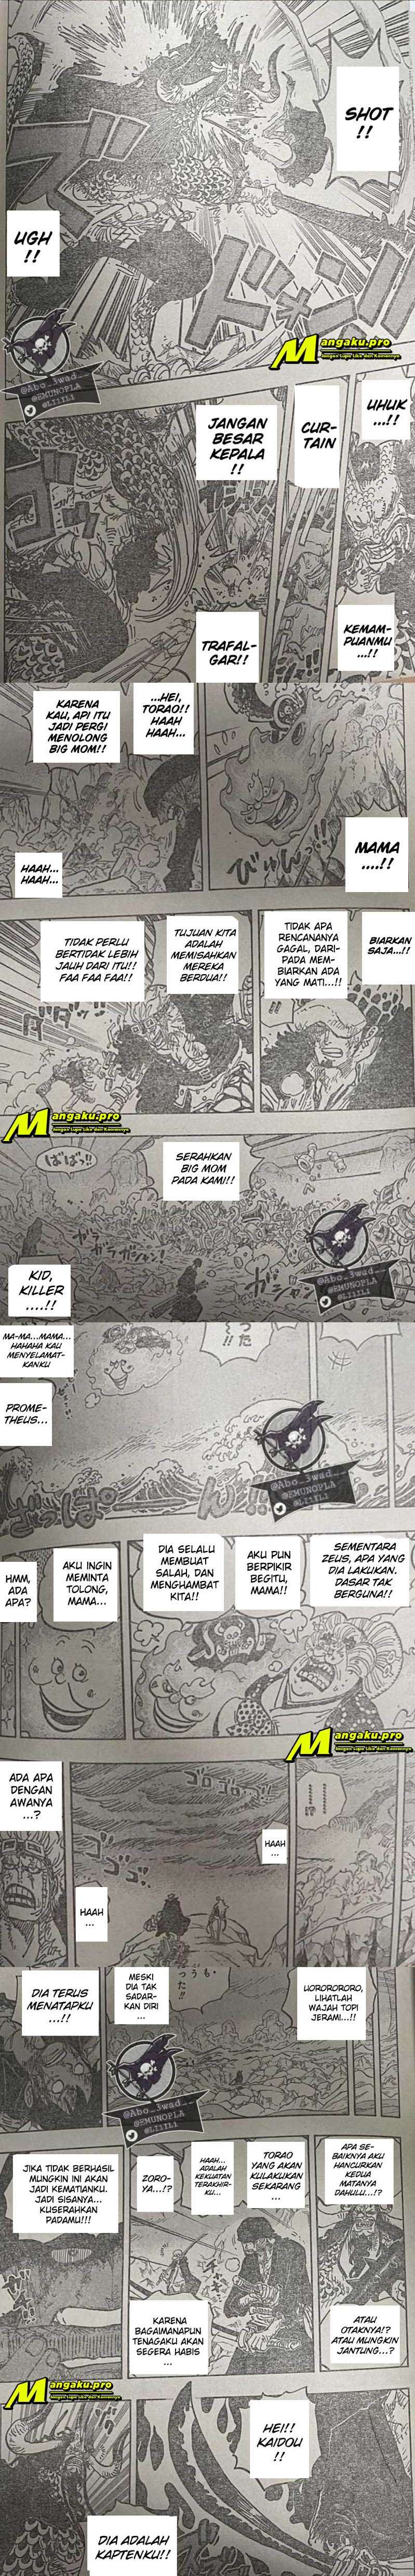 One Piece Chapter 1010 Lq - 73